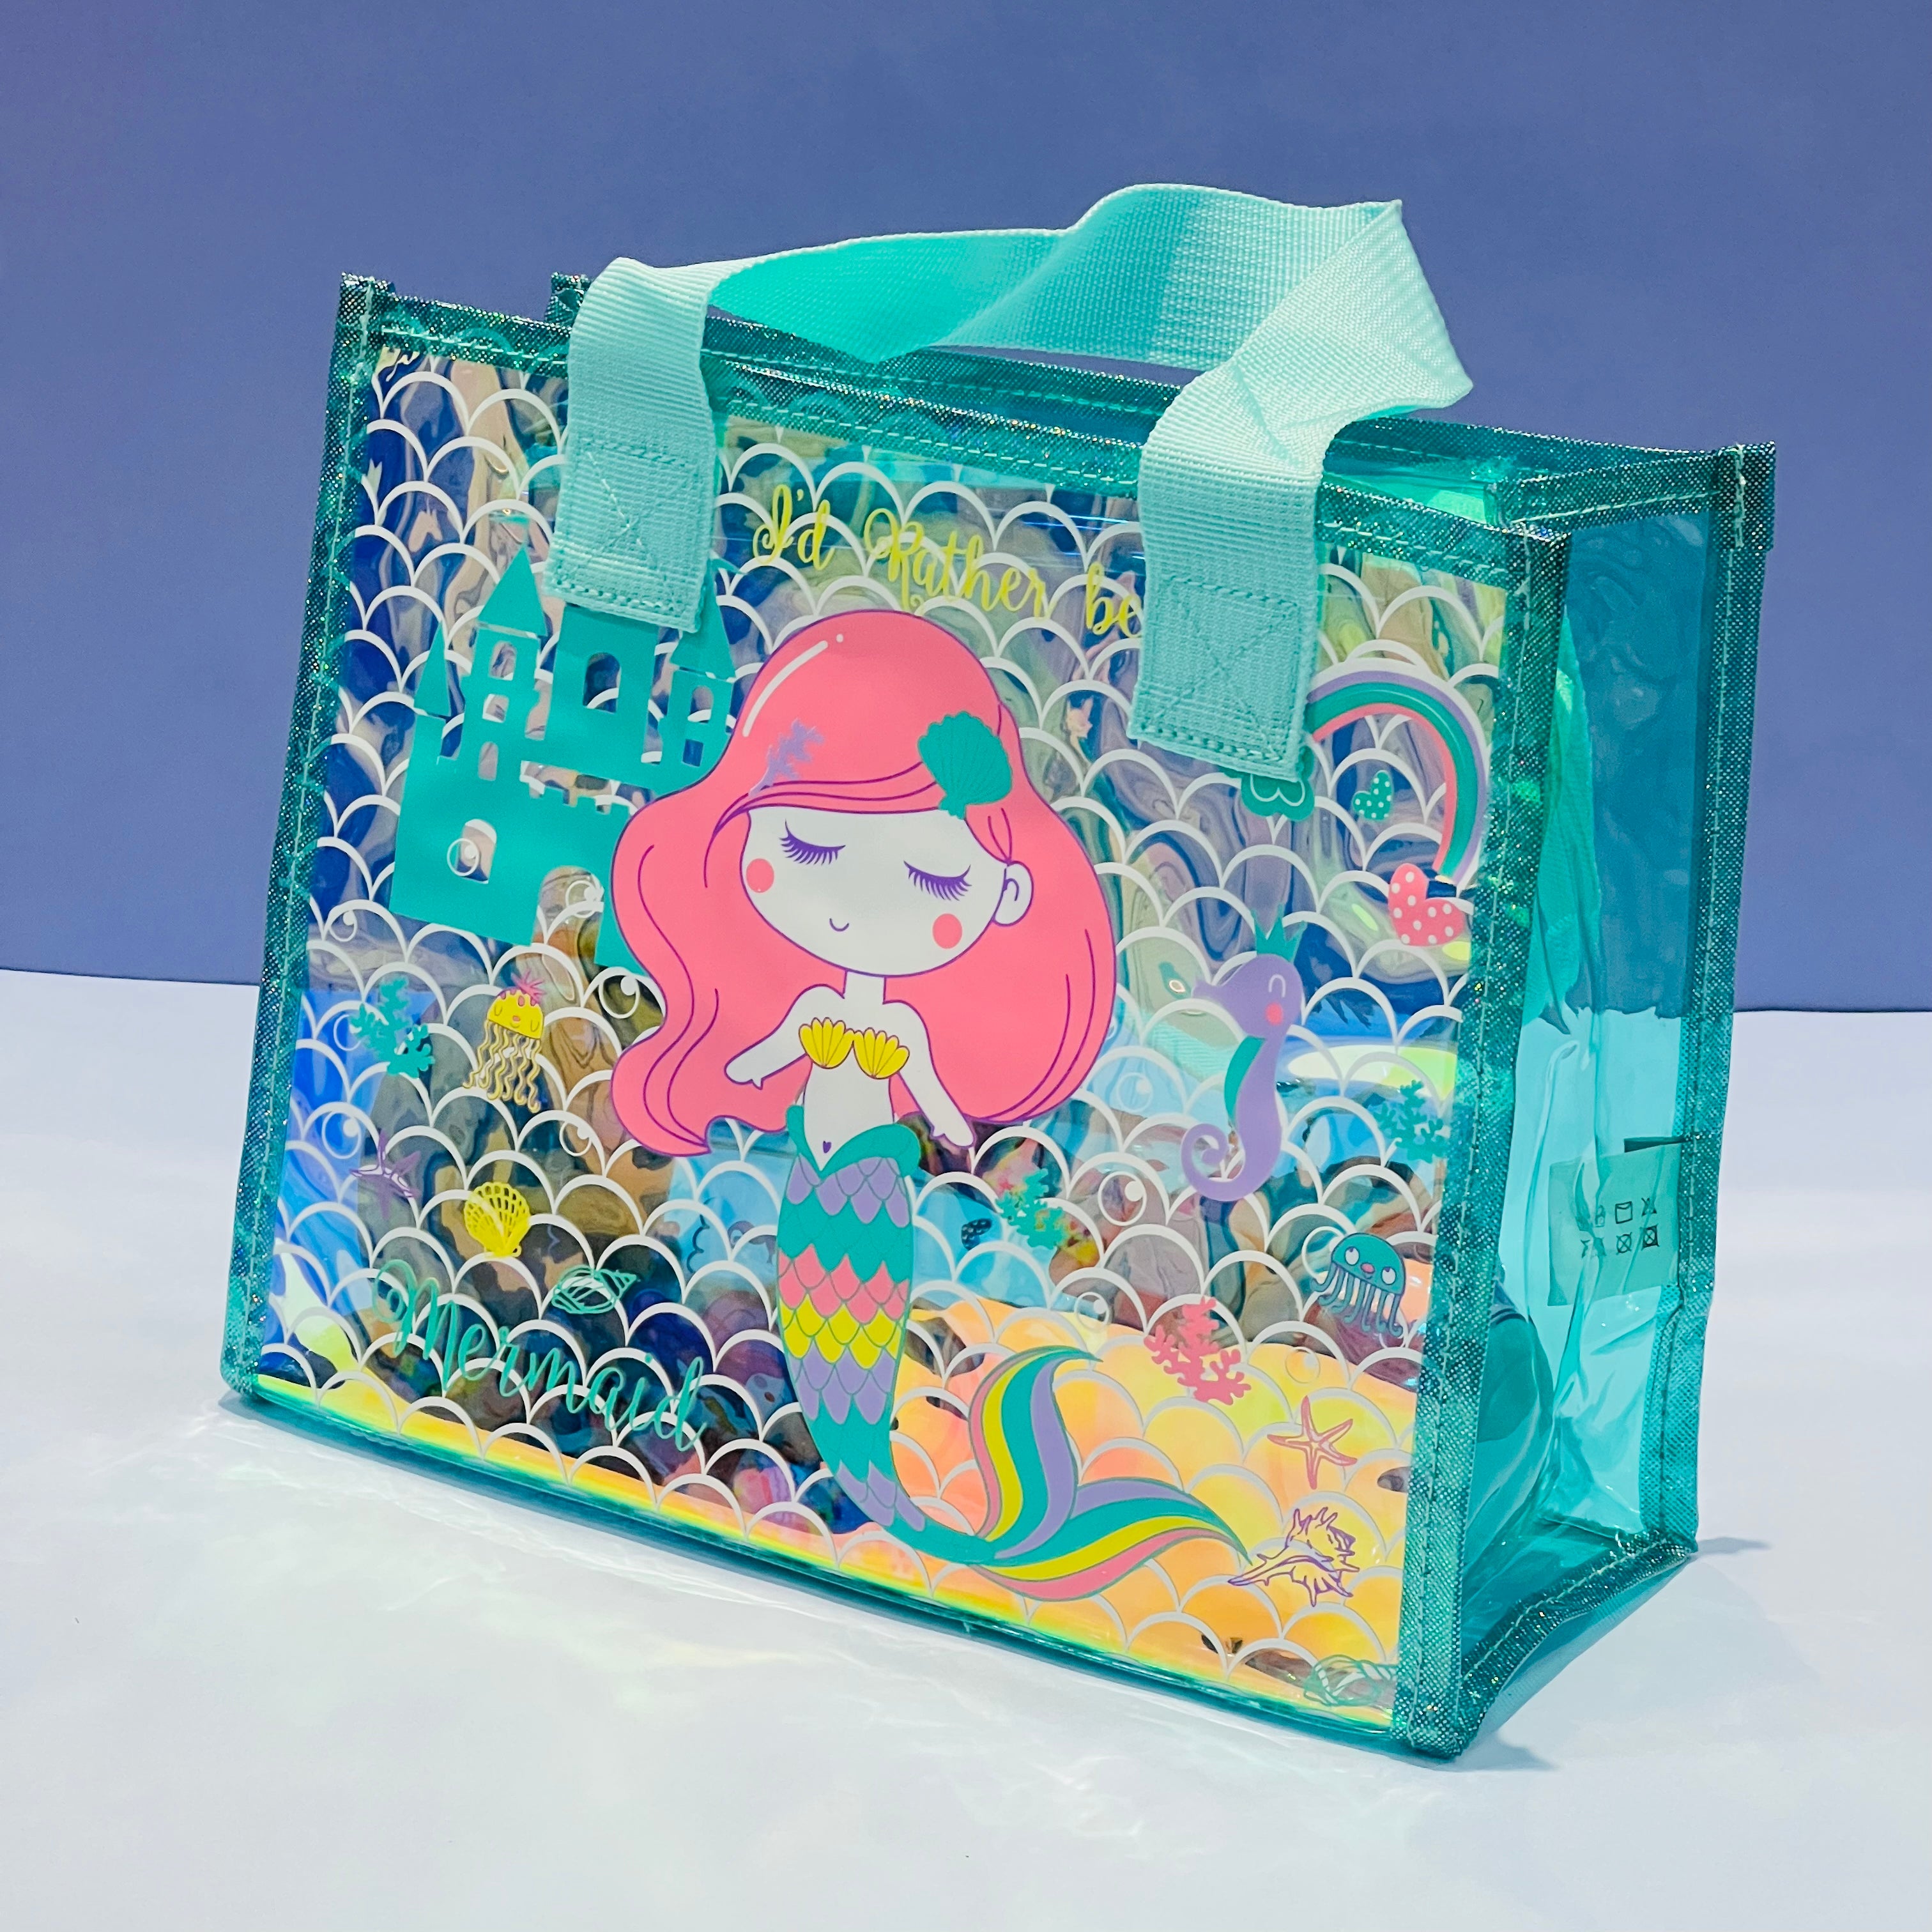 Buy Stitch Shoppe The Little Mermaid Treasure Chest Crossbody Bag at  Loungefly.